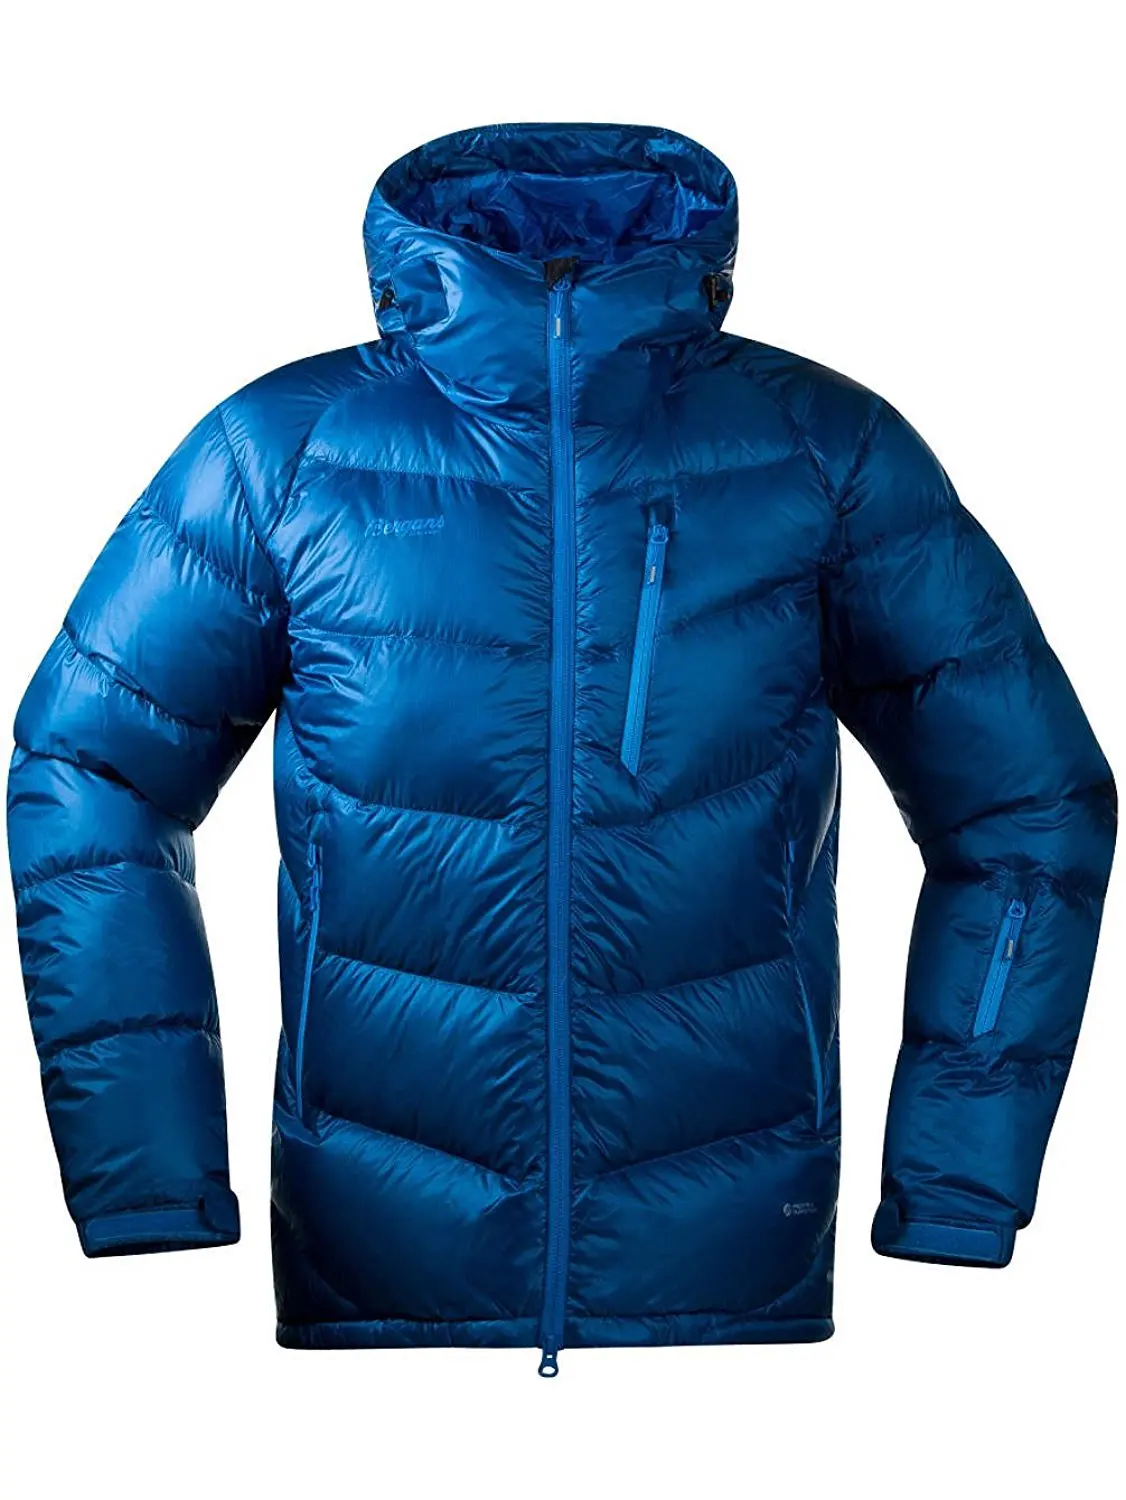 Cheap Norway Down Jacket, find Norway Down Jacket deals on line at ...